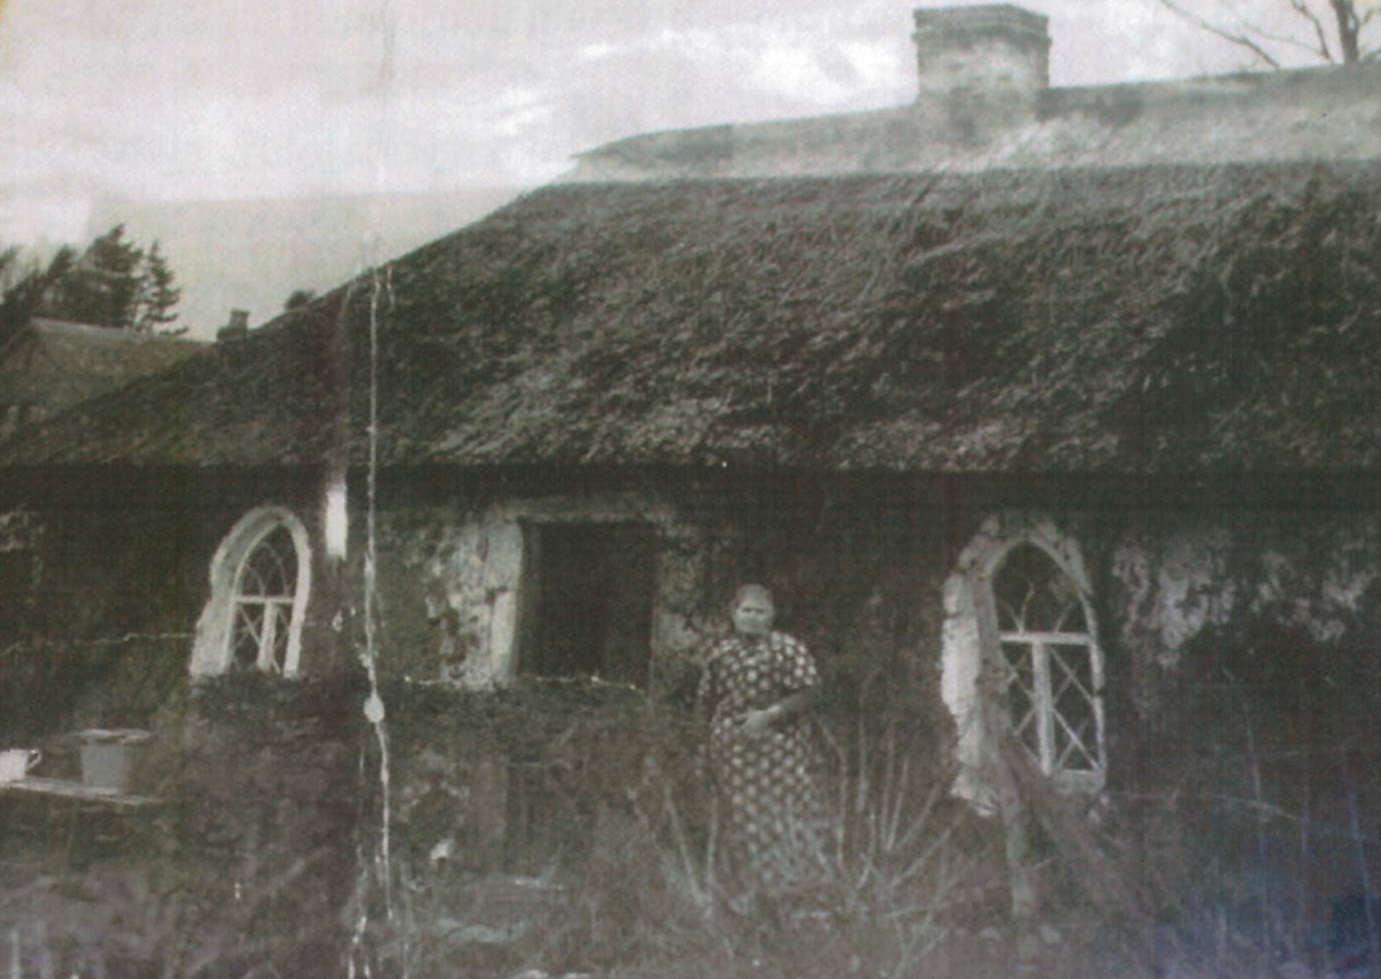 A 1948 photograph of a mudwall home at Muiredge that was later demolished.